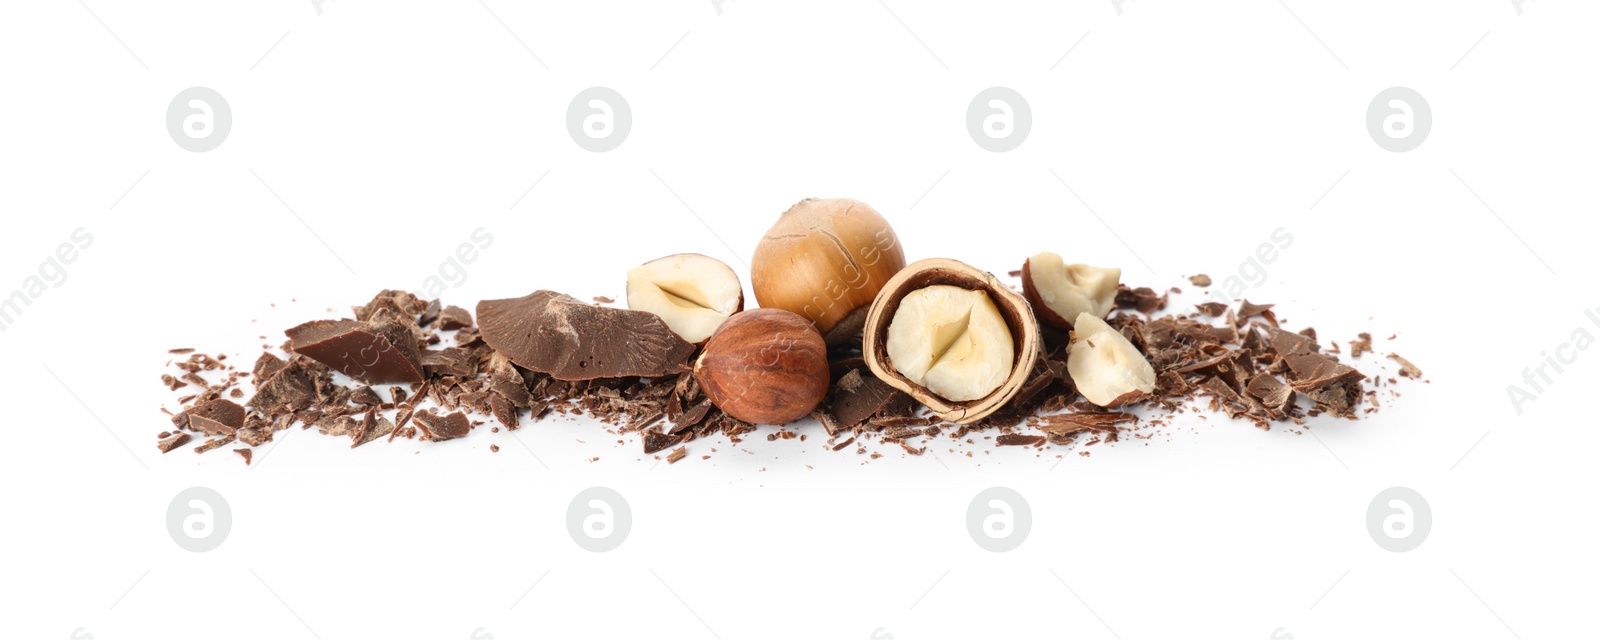 Photo of Delicious chocolate crumbles and hazelnuts on white background